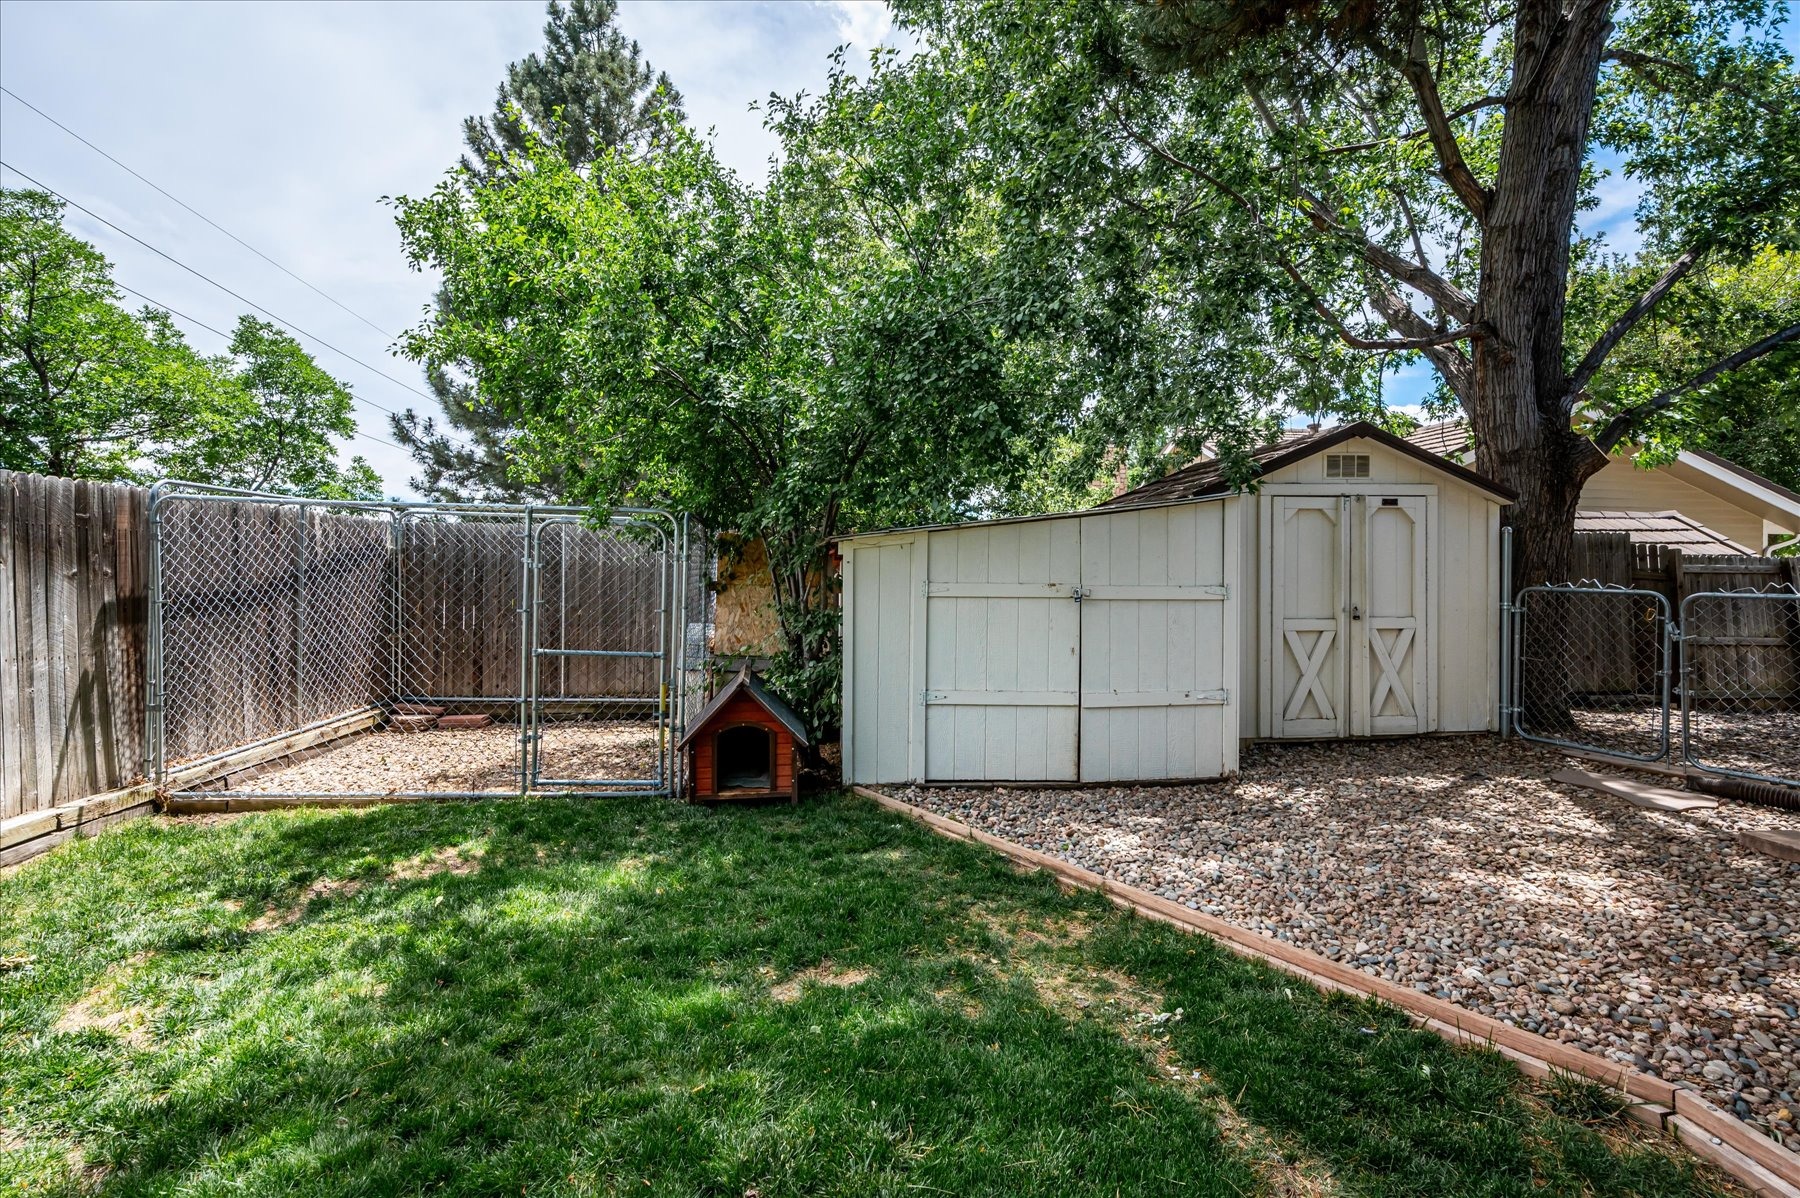 Two Storage Sheds and 10 x 10 Dog Run in Backyard